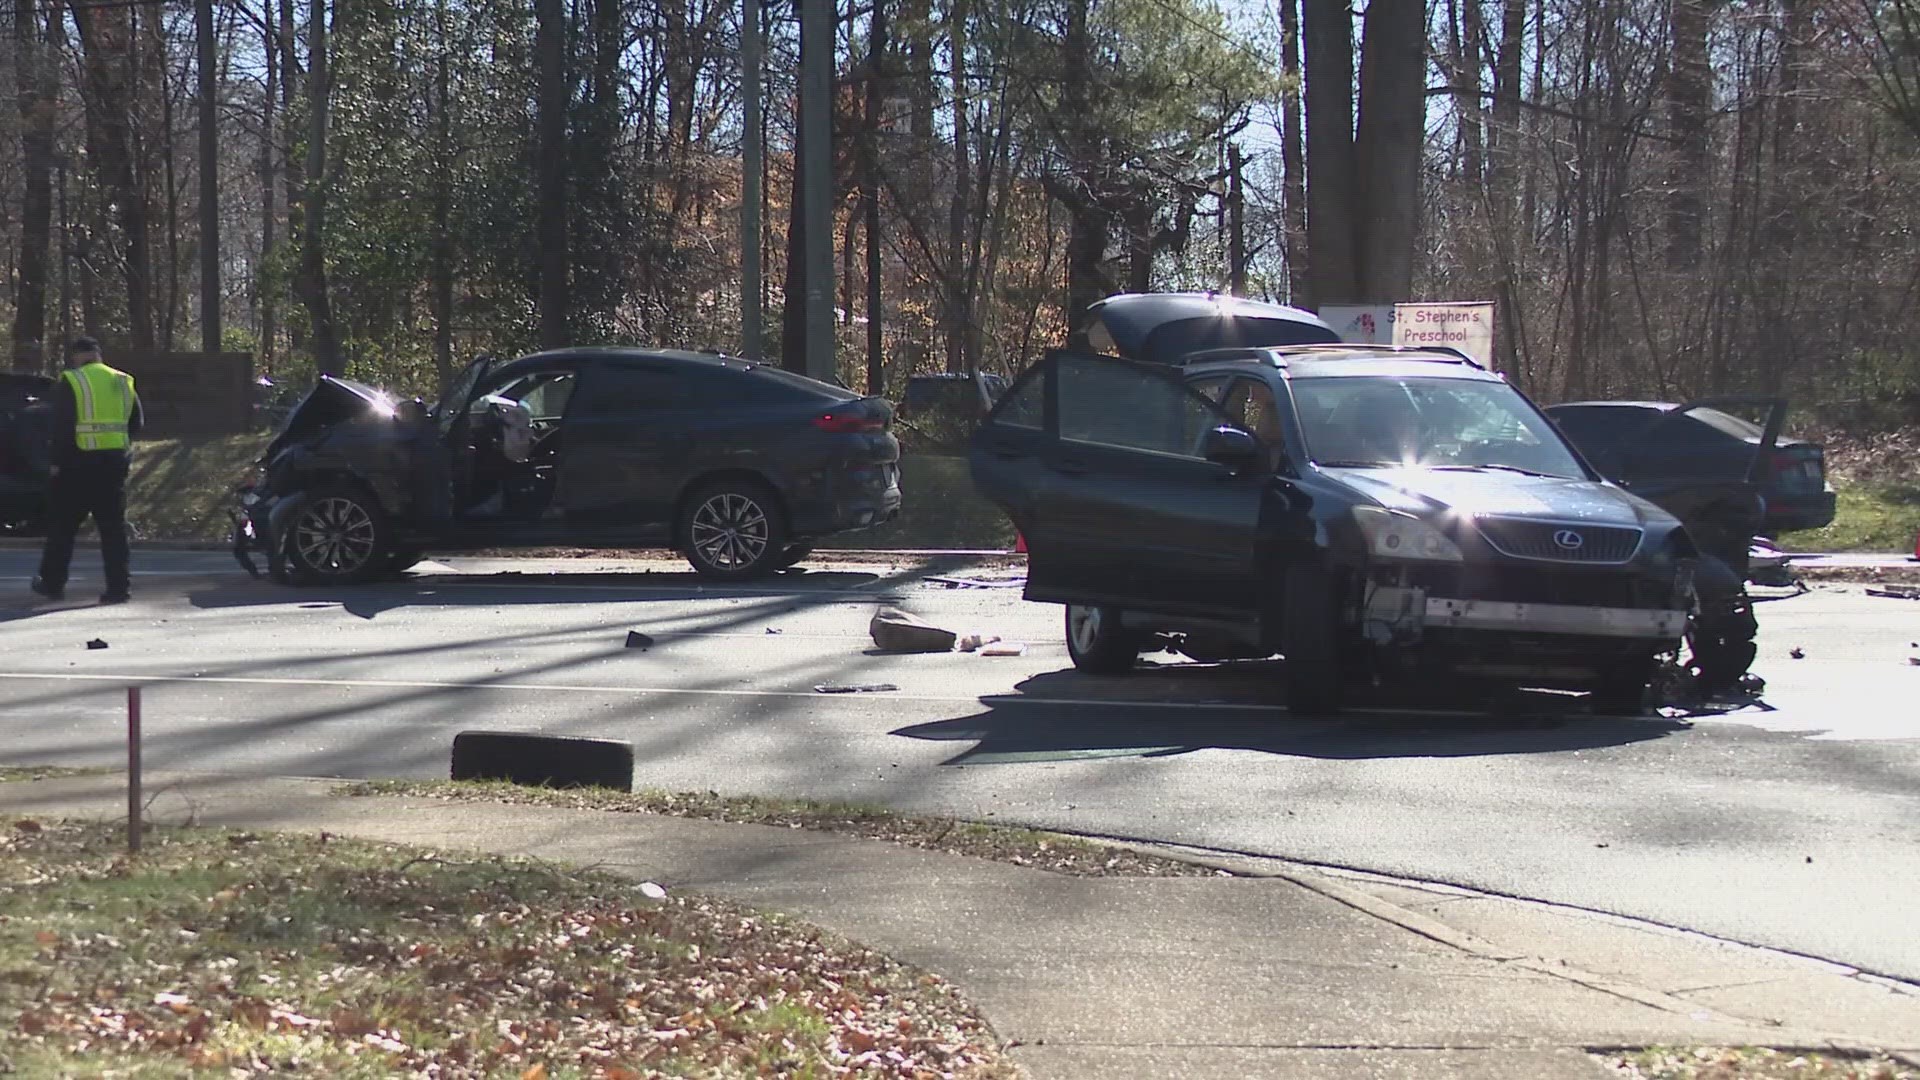 Seven people were taken to an area hospital. The crash happened at Braddock Road and Bradfield Drive in Annandale.